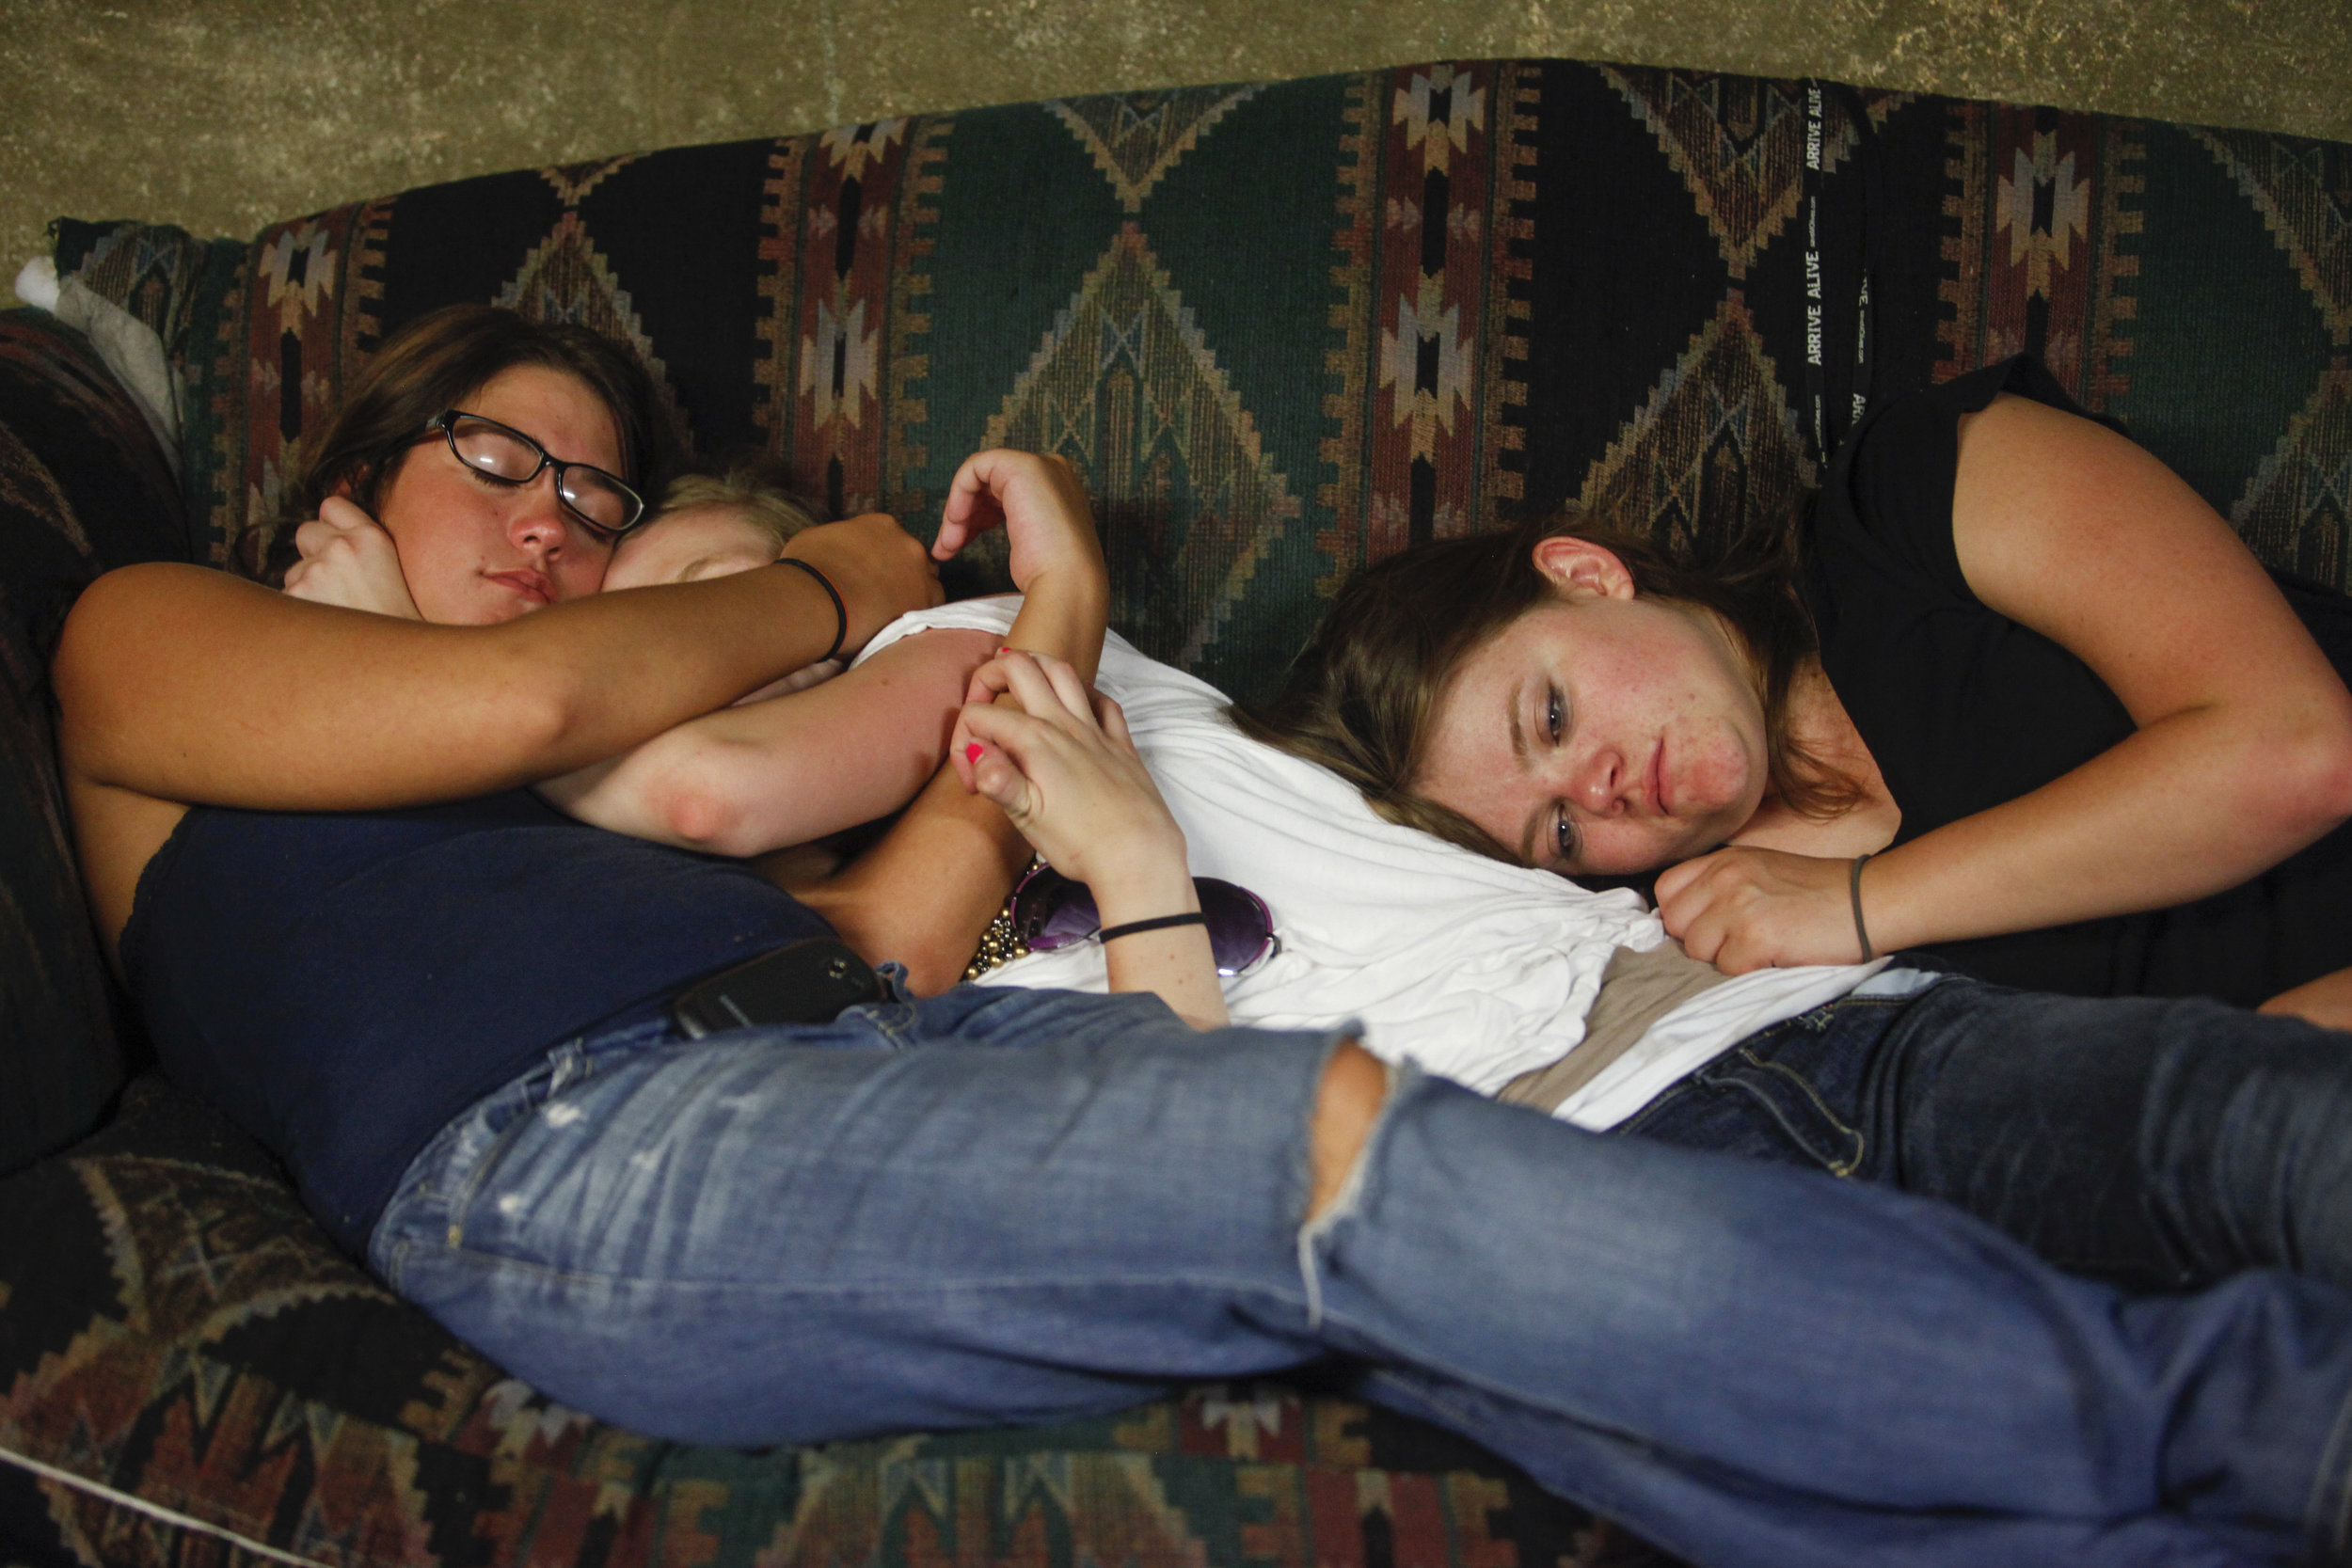  Cami Barnita, left, hugs Heather Hopkins as they are about to pass out after a party on the couch of their friend Sunday evening, May 6, 2012 in West Plains, Mo. Samantha Price lays with them and looks away. 